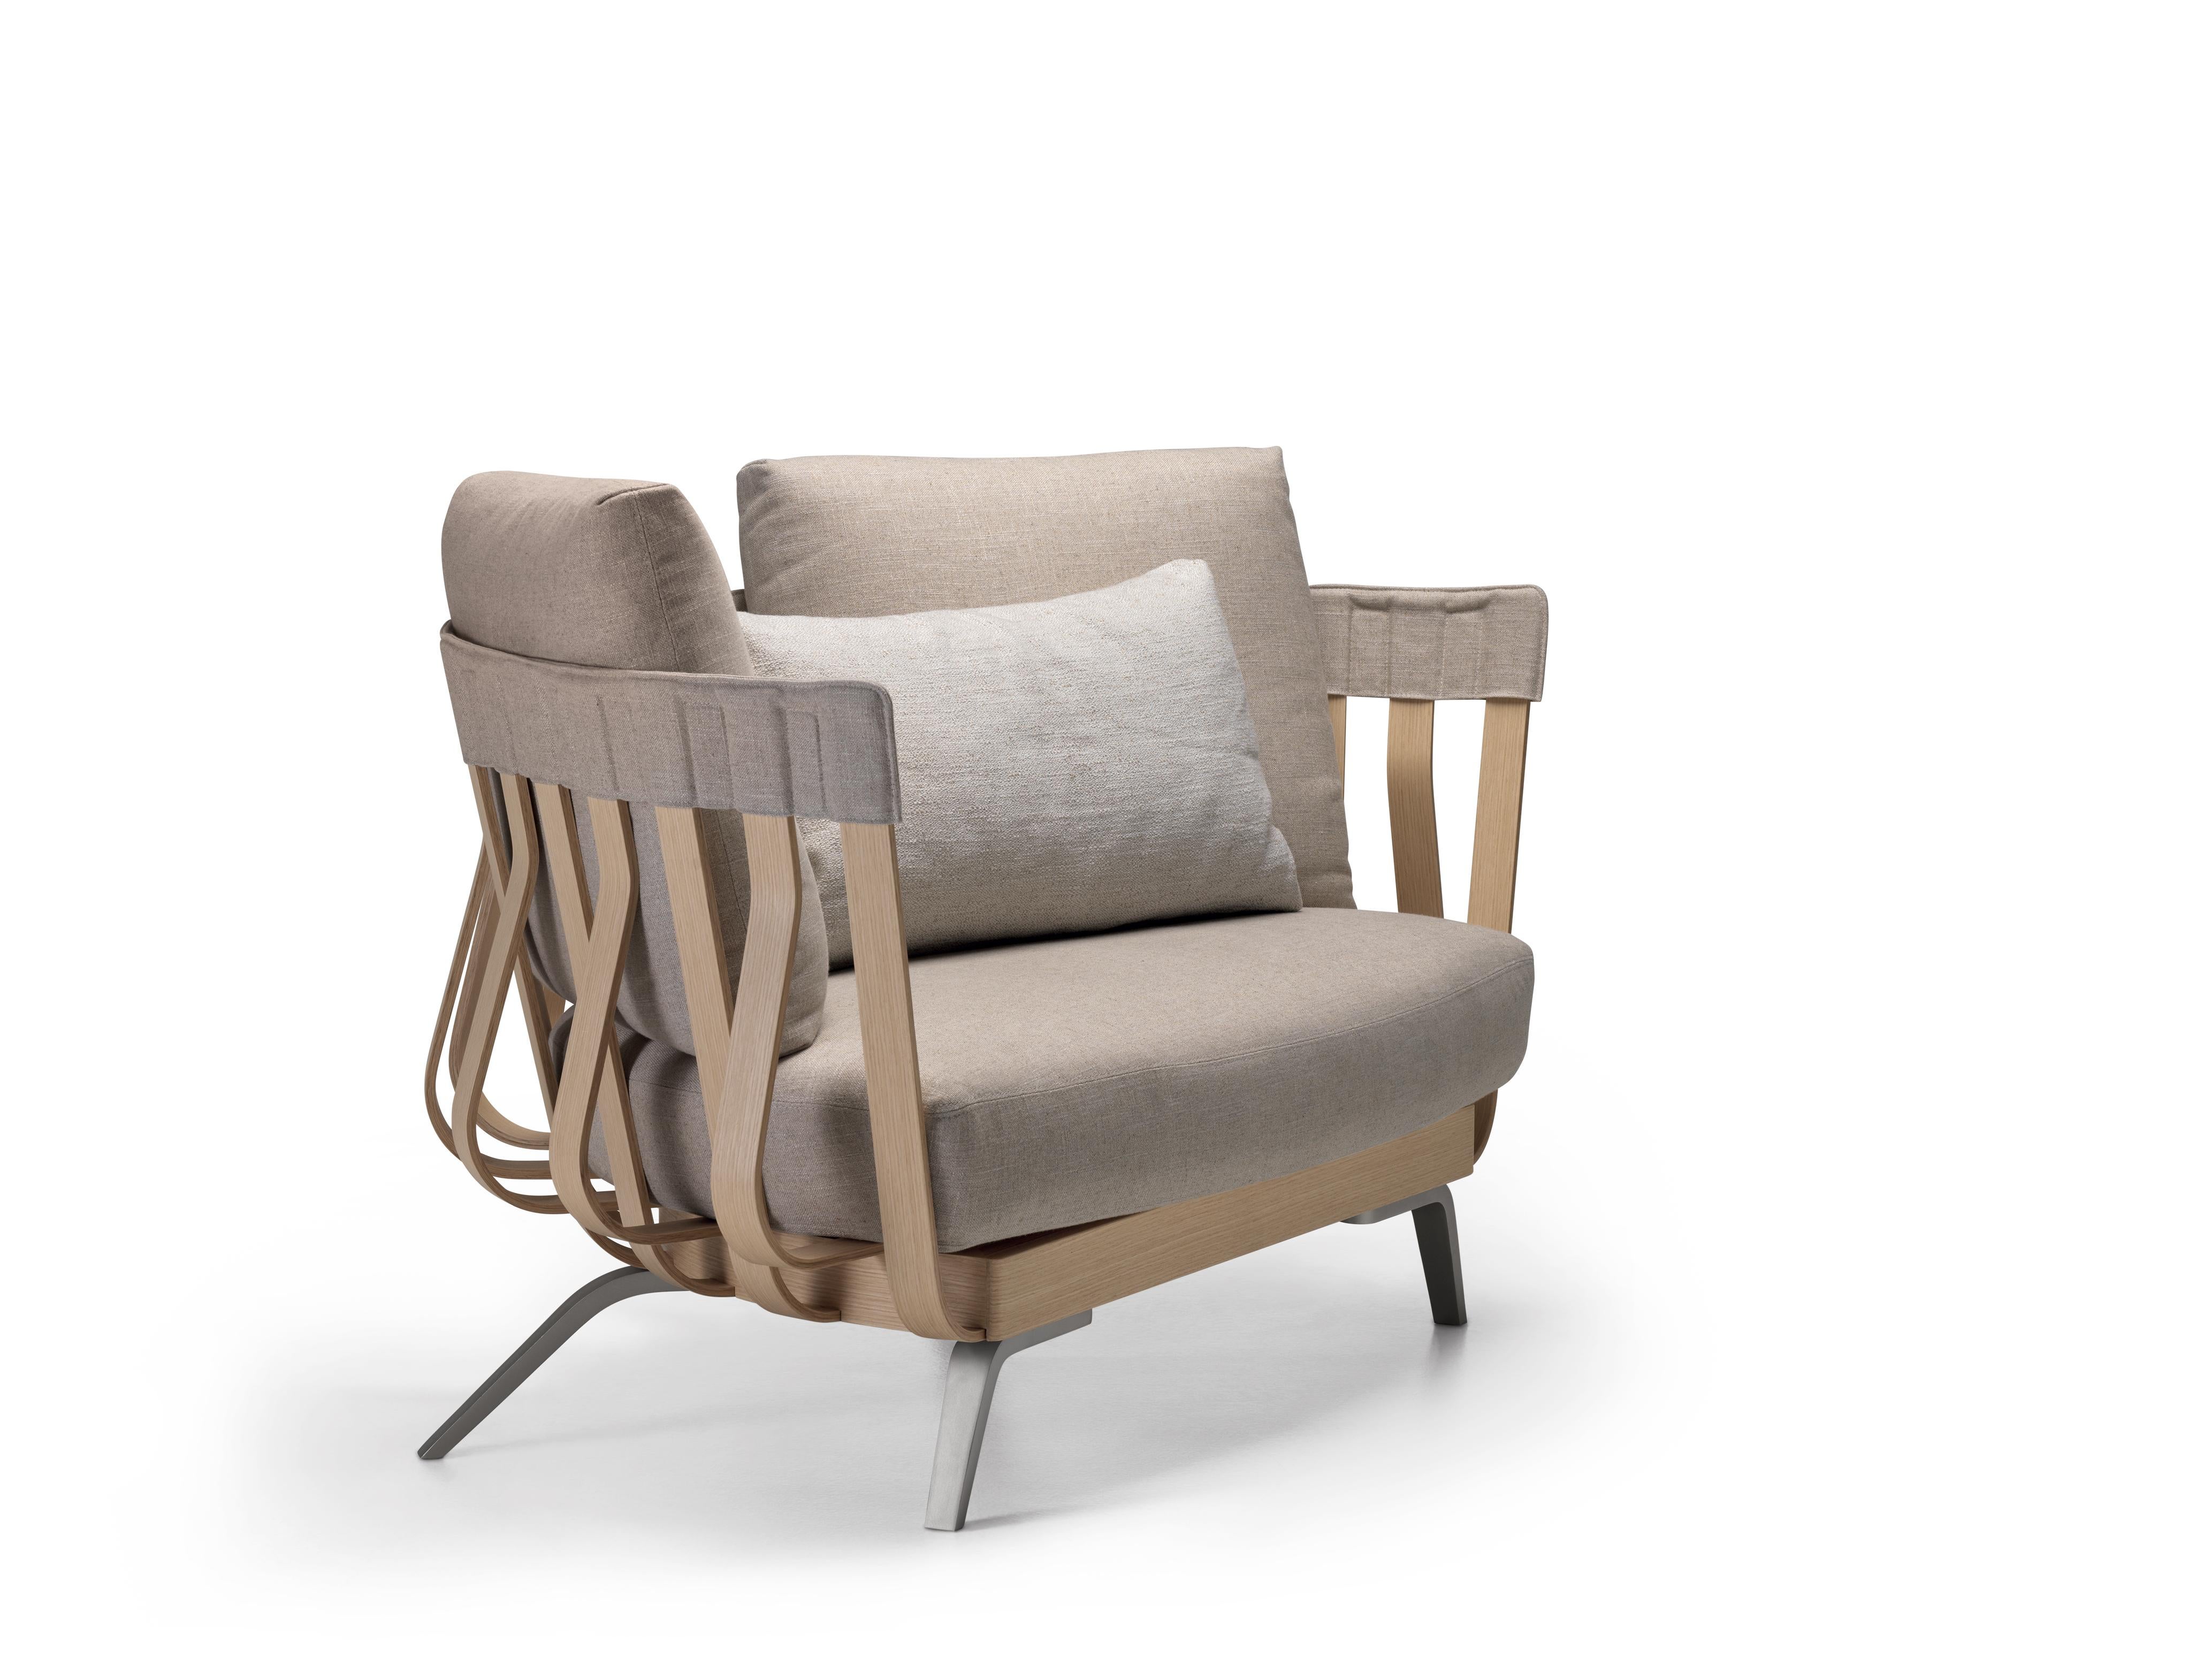 Alias 02A E la nave va Armchair in Anodized Gold Aluminum and Oak Frame by Atelier oï

Armchair composed with curved oak multilayer slats; structure in veneered beech plywood and feet in lacquered die-cast aluminium. Seat and cushions with